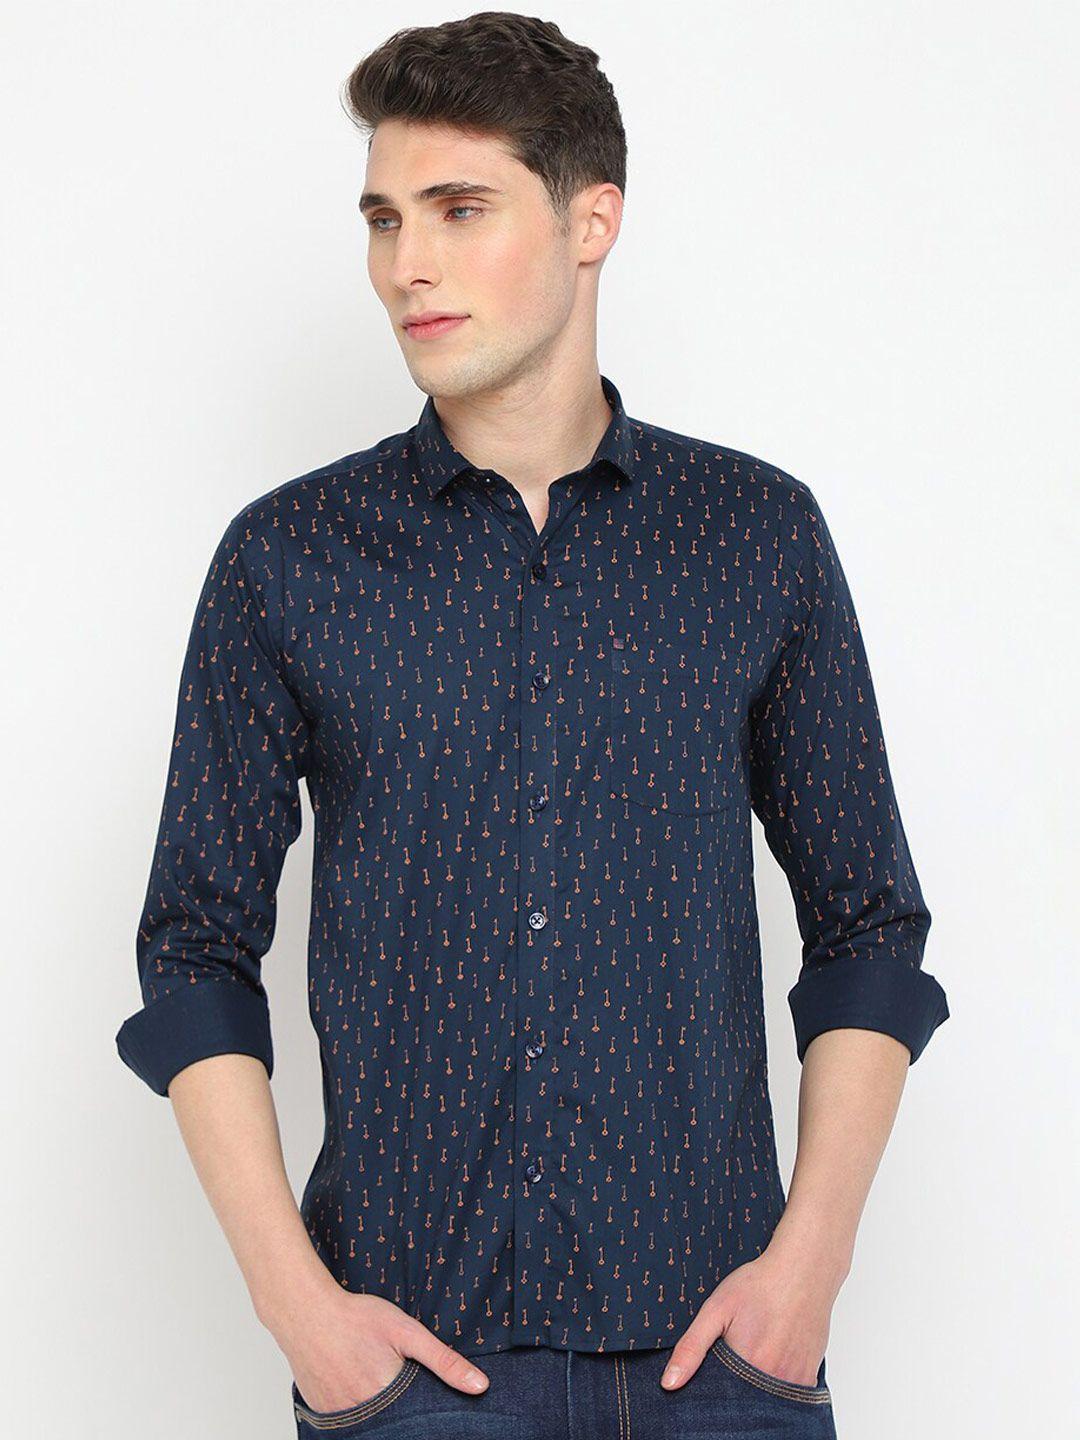 jadeberry conversational printed classic slim fit cotton casual shirt